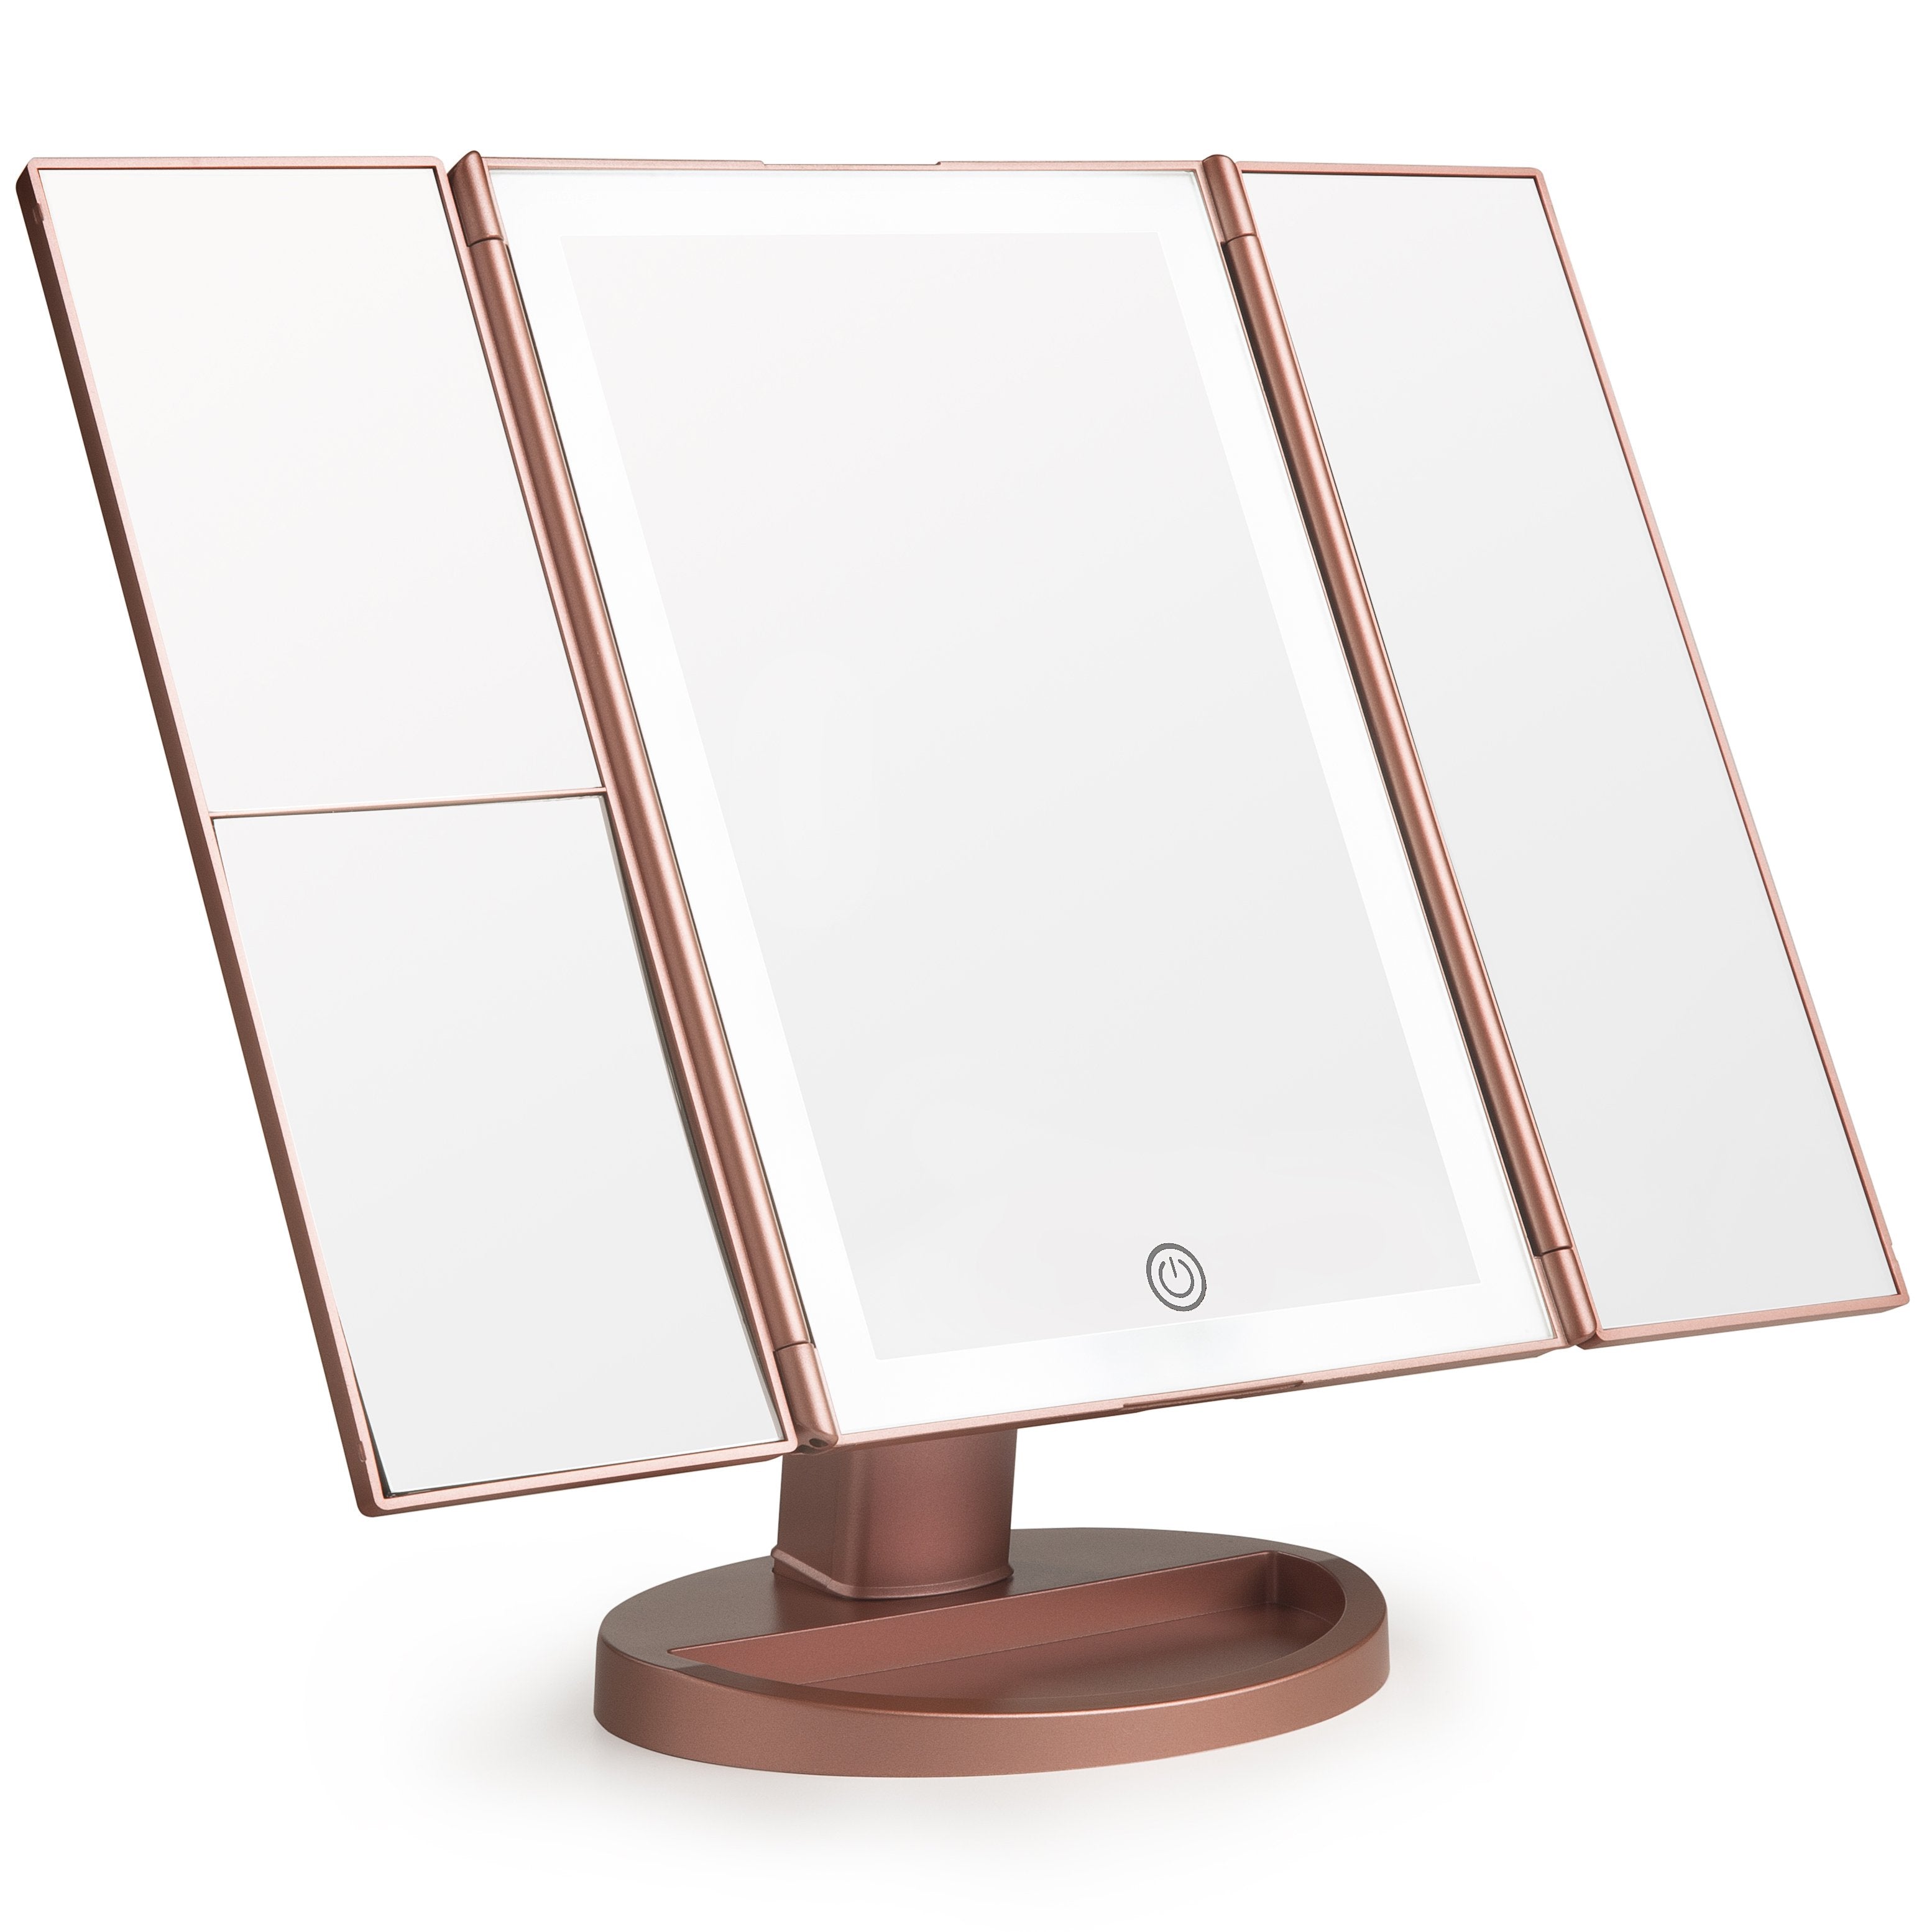 LIT by Prosper Beauty (LED Panoramic Vanity Mirror - Rose Gold)